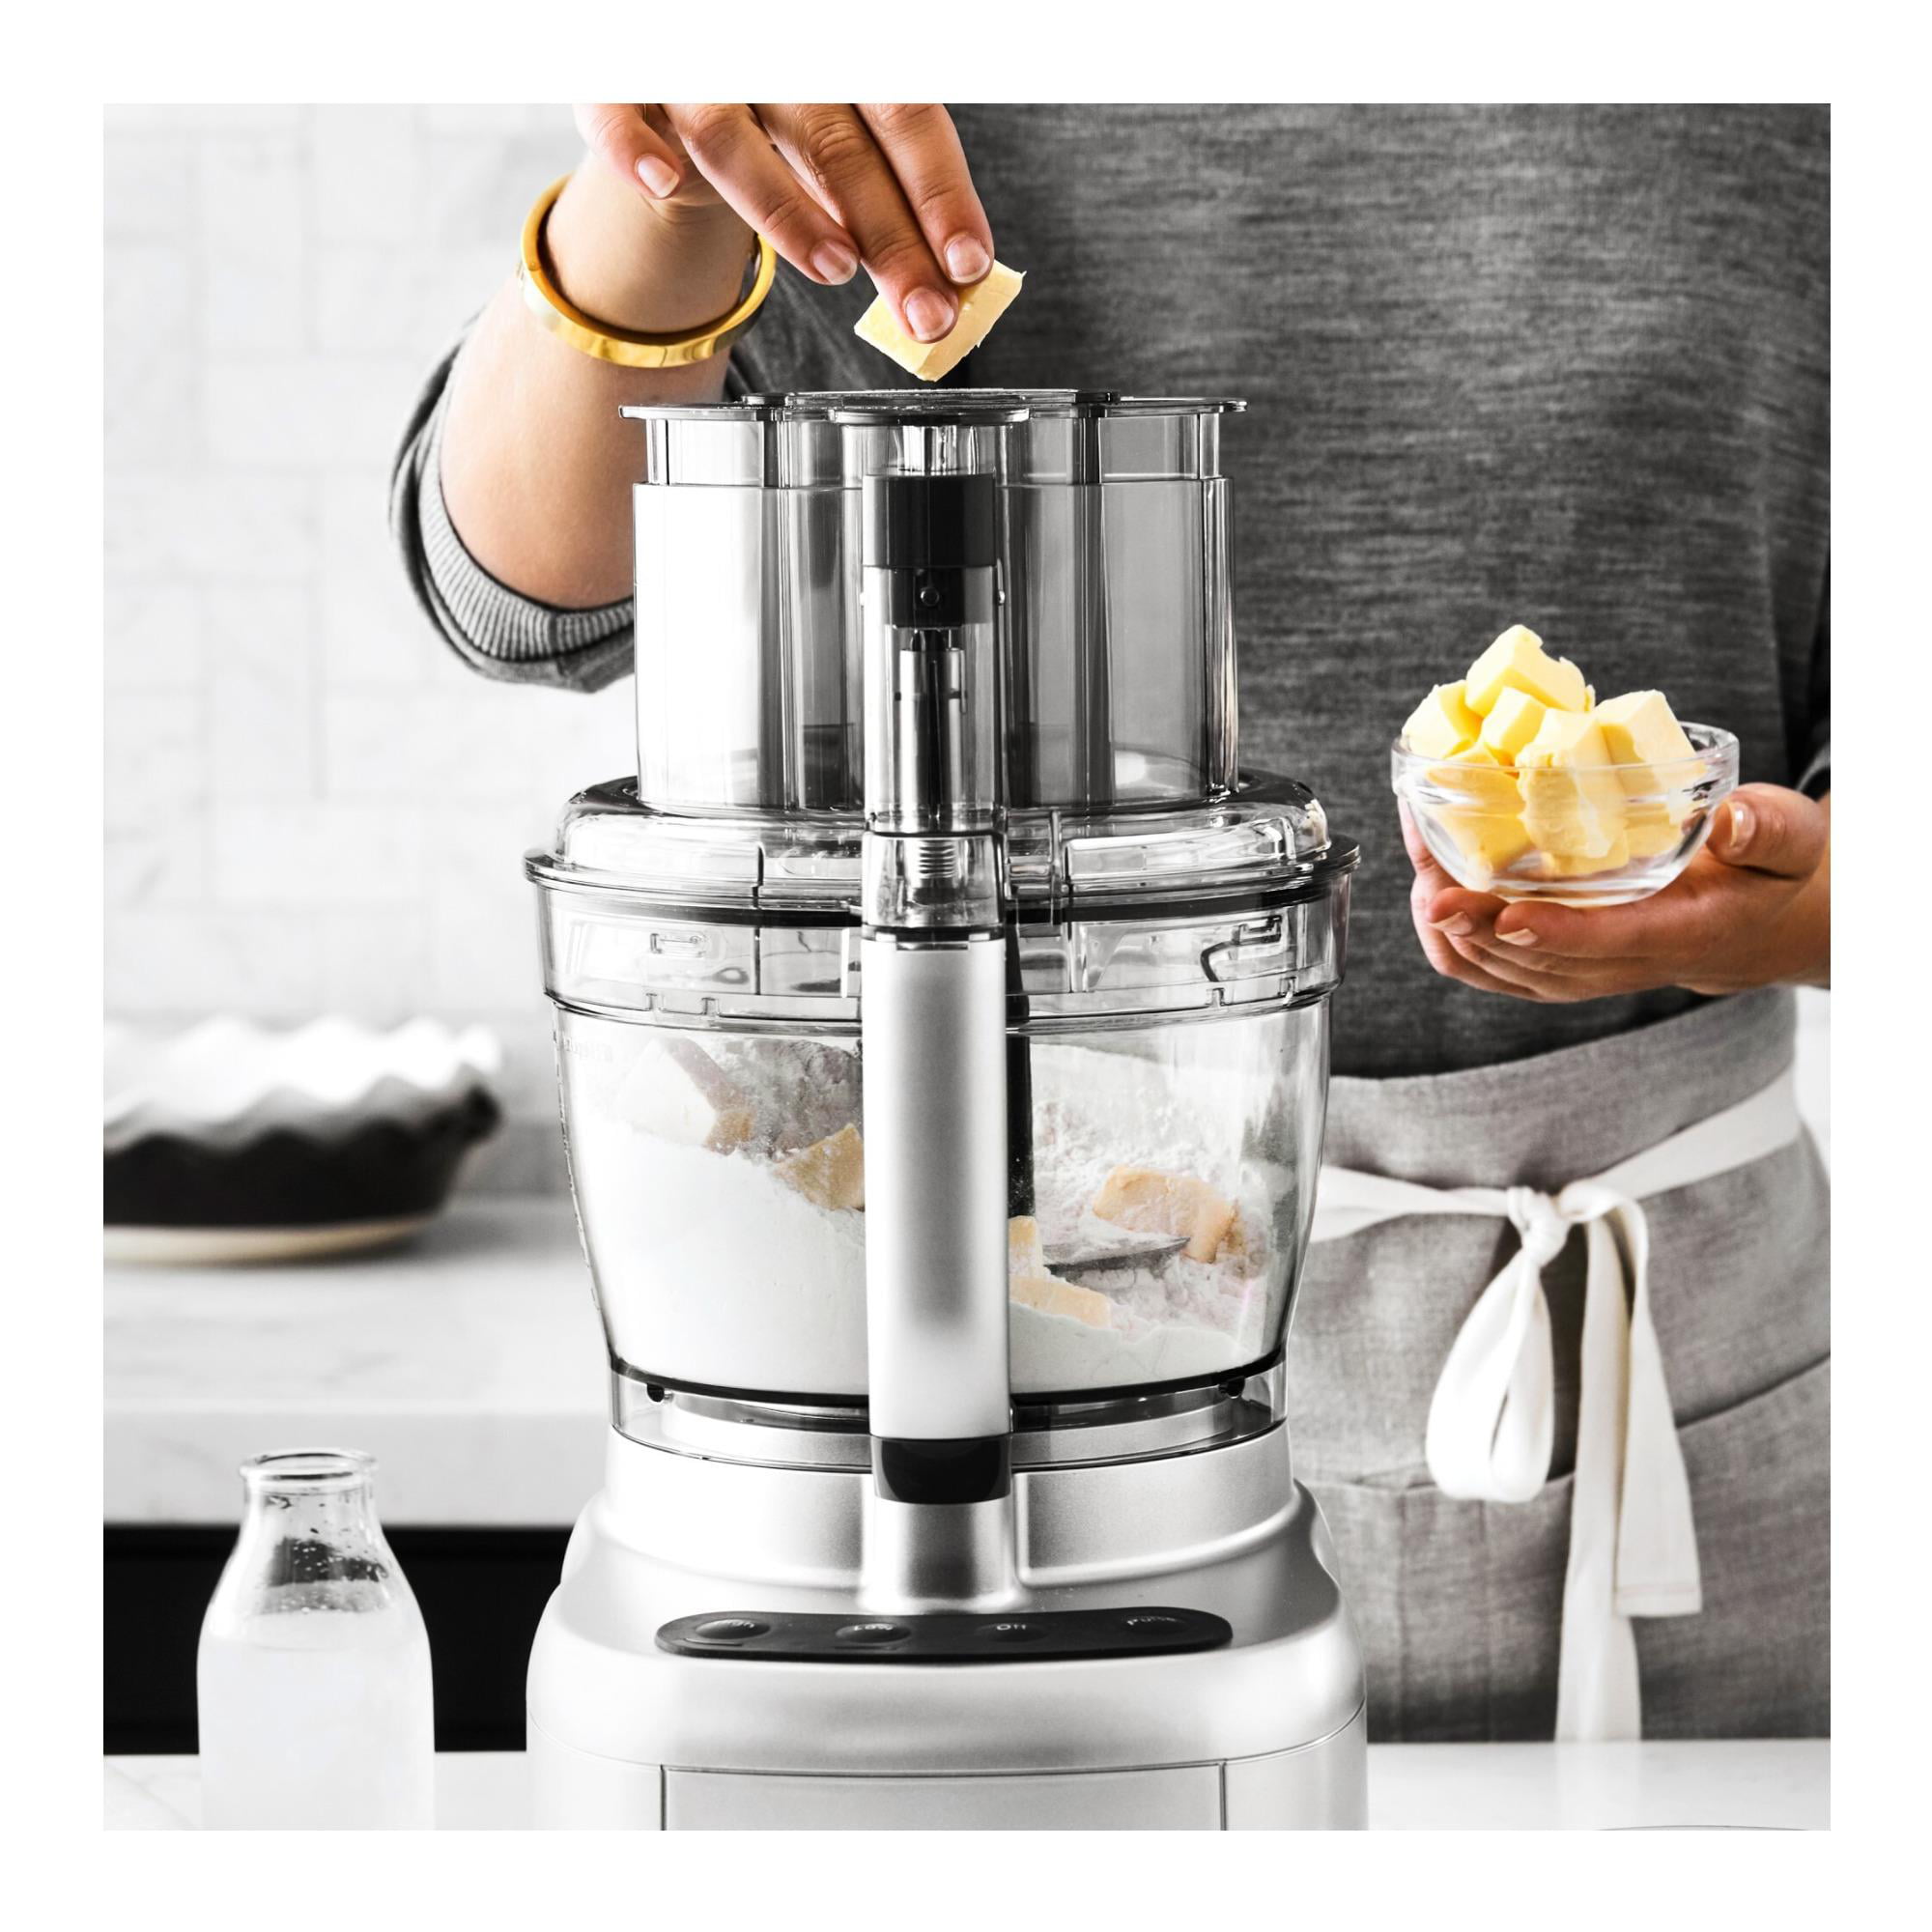 Cuisinart Elemental 13 Cup Food Processor With Spiralizer CFP-26SVPC BRAND  NEW!